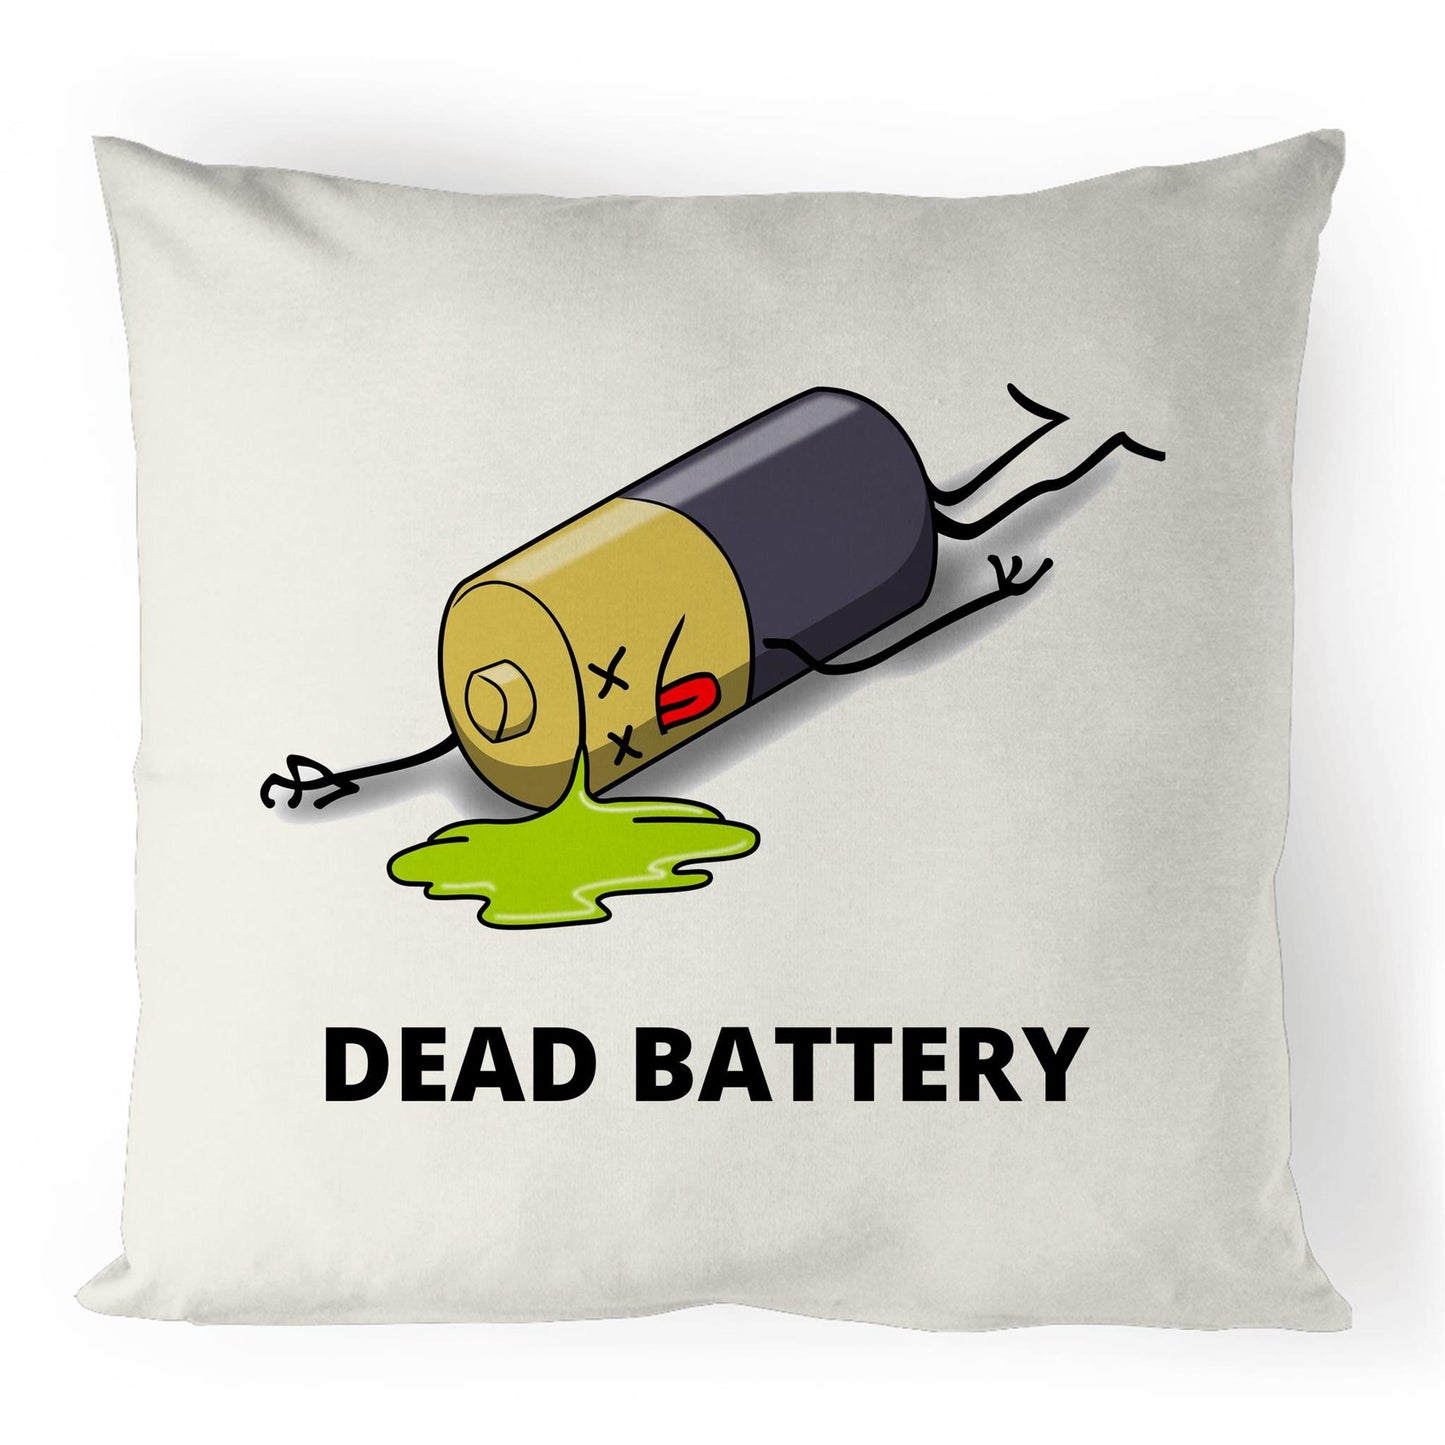 Dead Battery - 100% Linen Cushion Cover Natural One-Size Linen Cushion Cover Funny